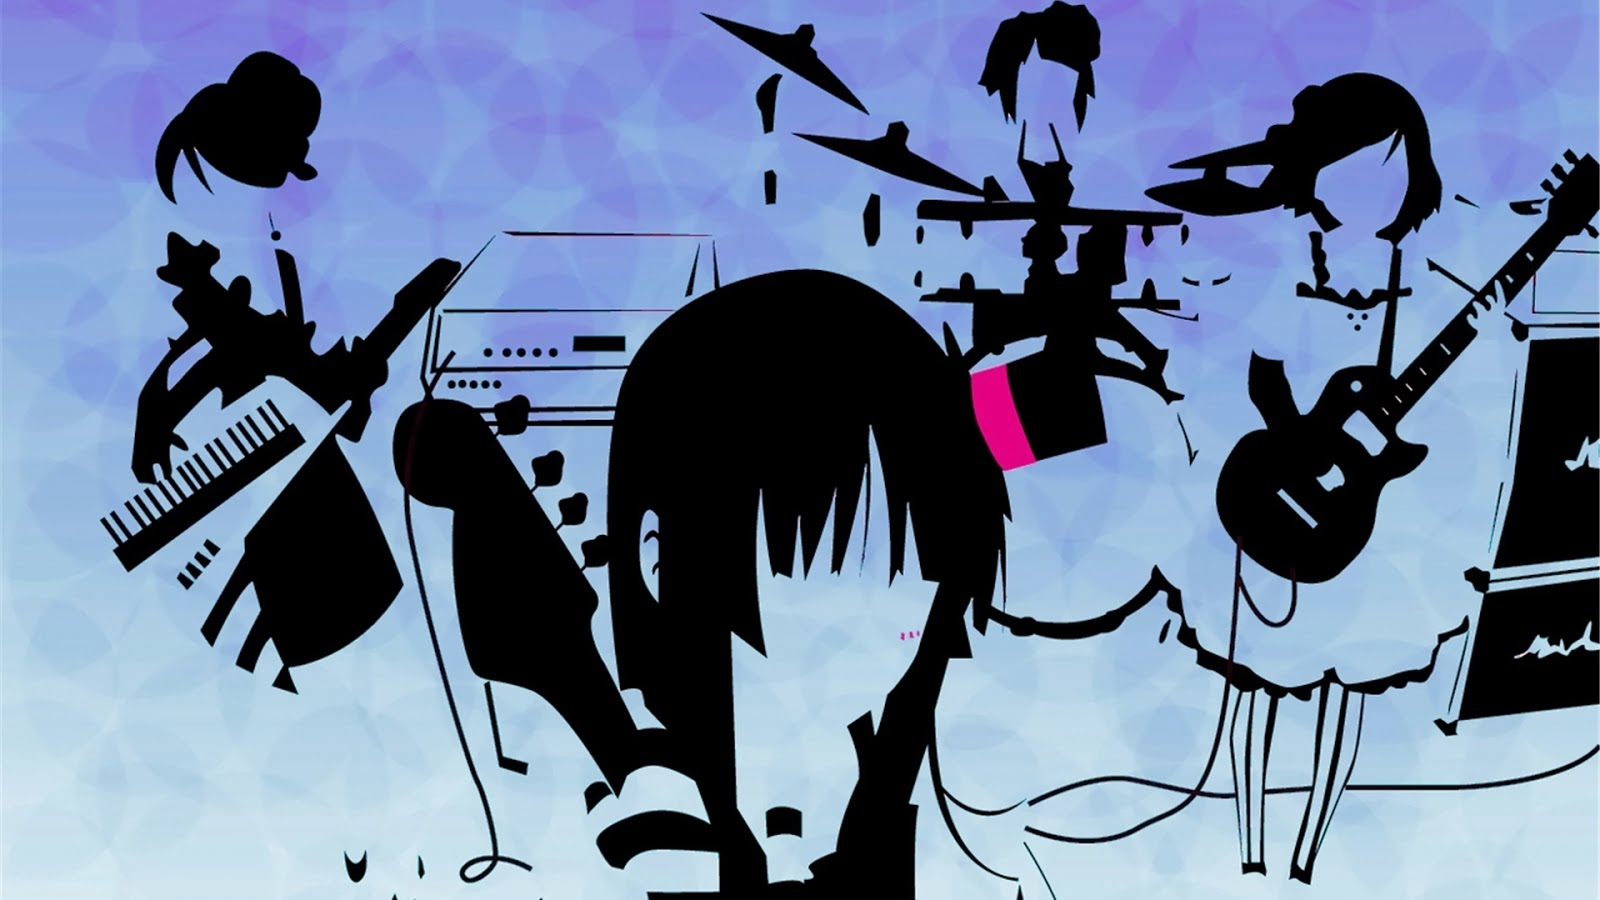 On Anime Girl Band Music Instrument Wallpaper HD A863